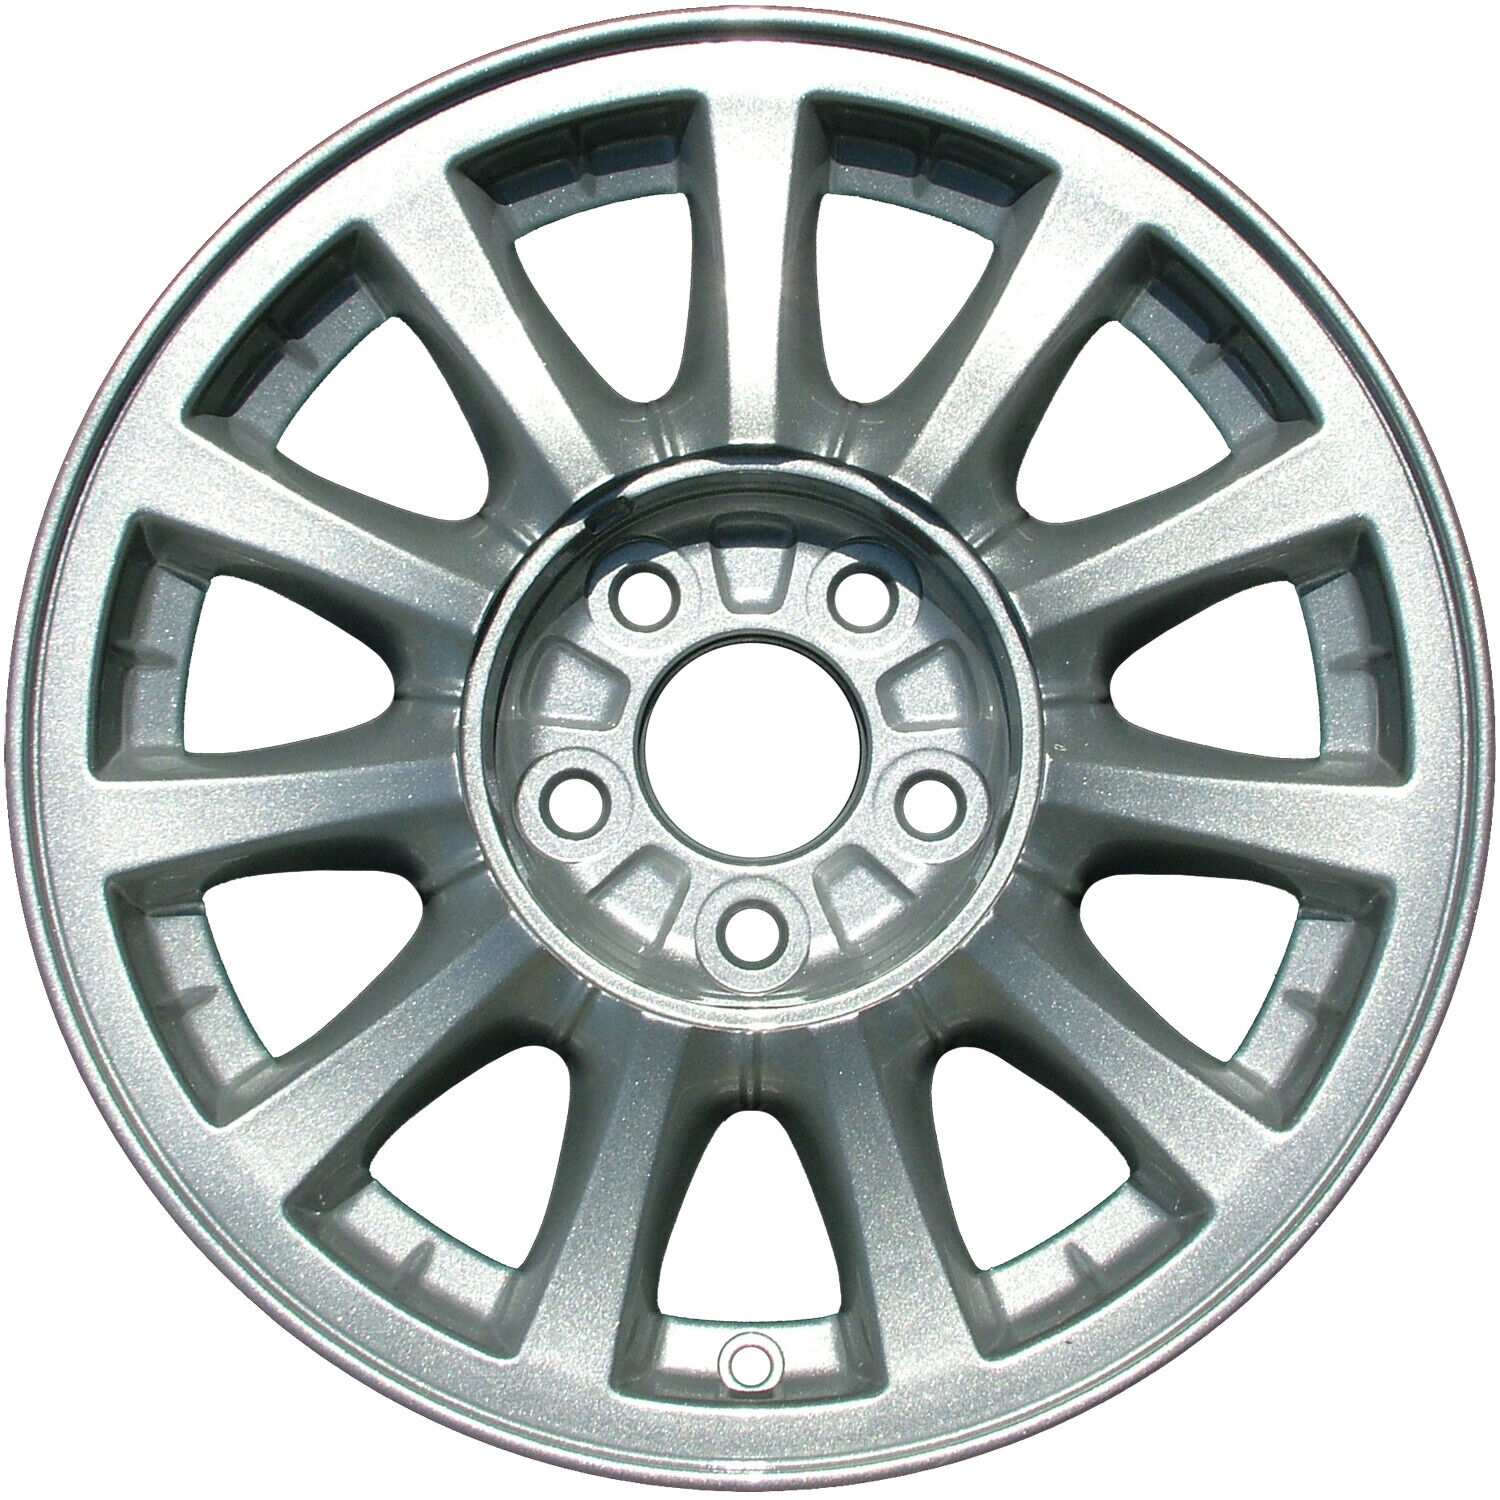 03323 Reconditioned OEM Aluminum Wheel 15x6.5 fits 1999-2001 Ford Windstar